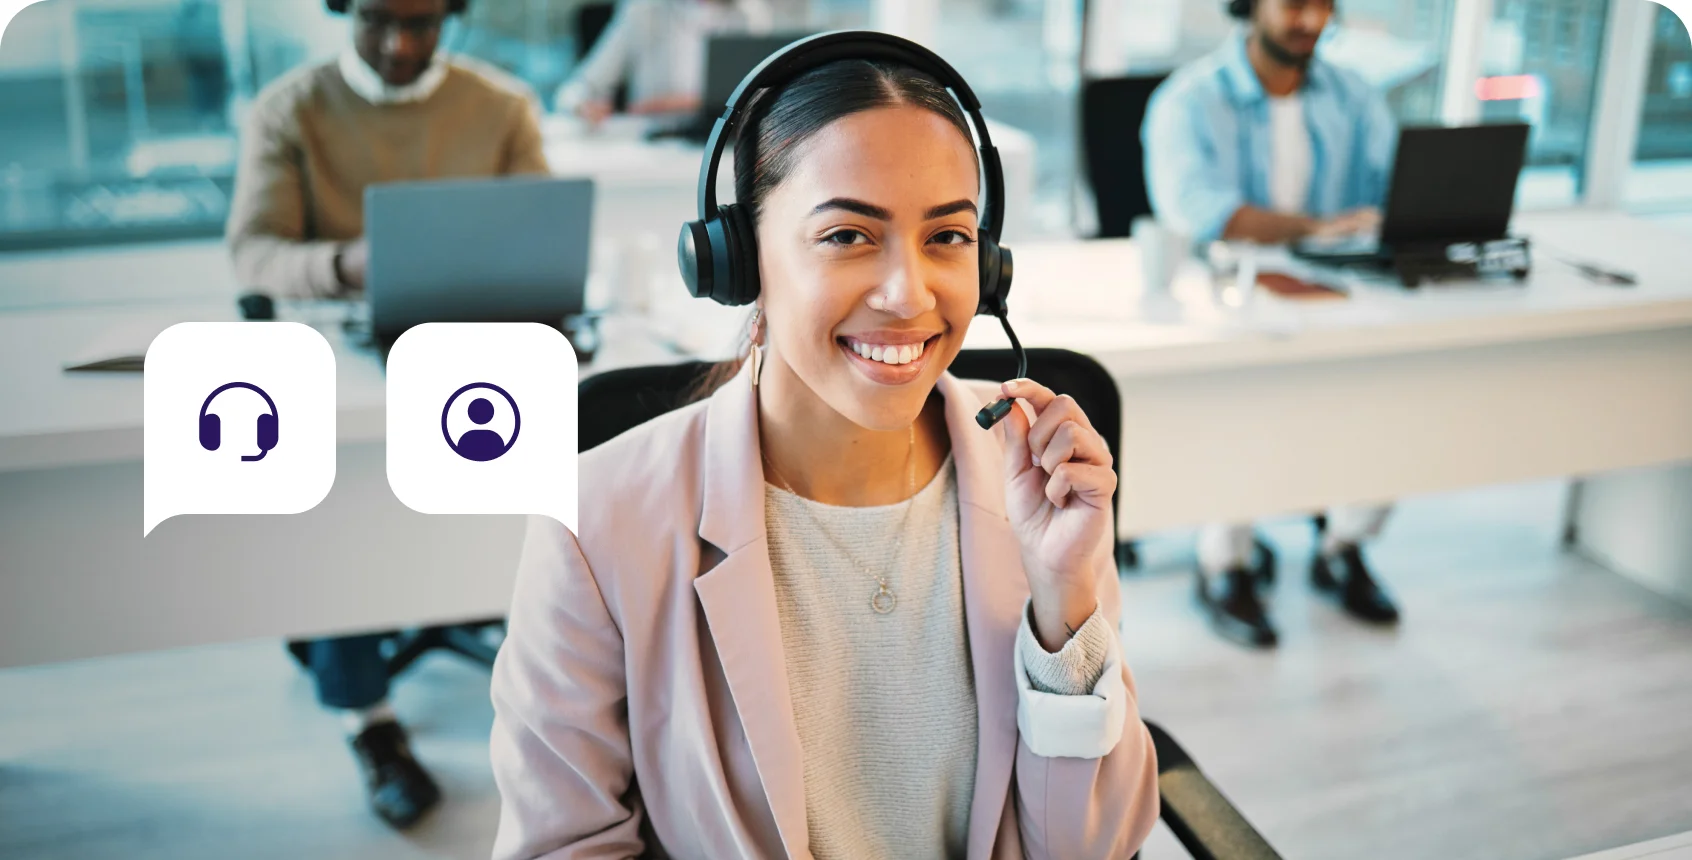 Customer service in a call center: A detailed guide